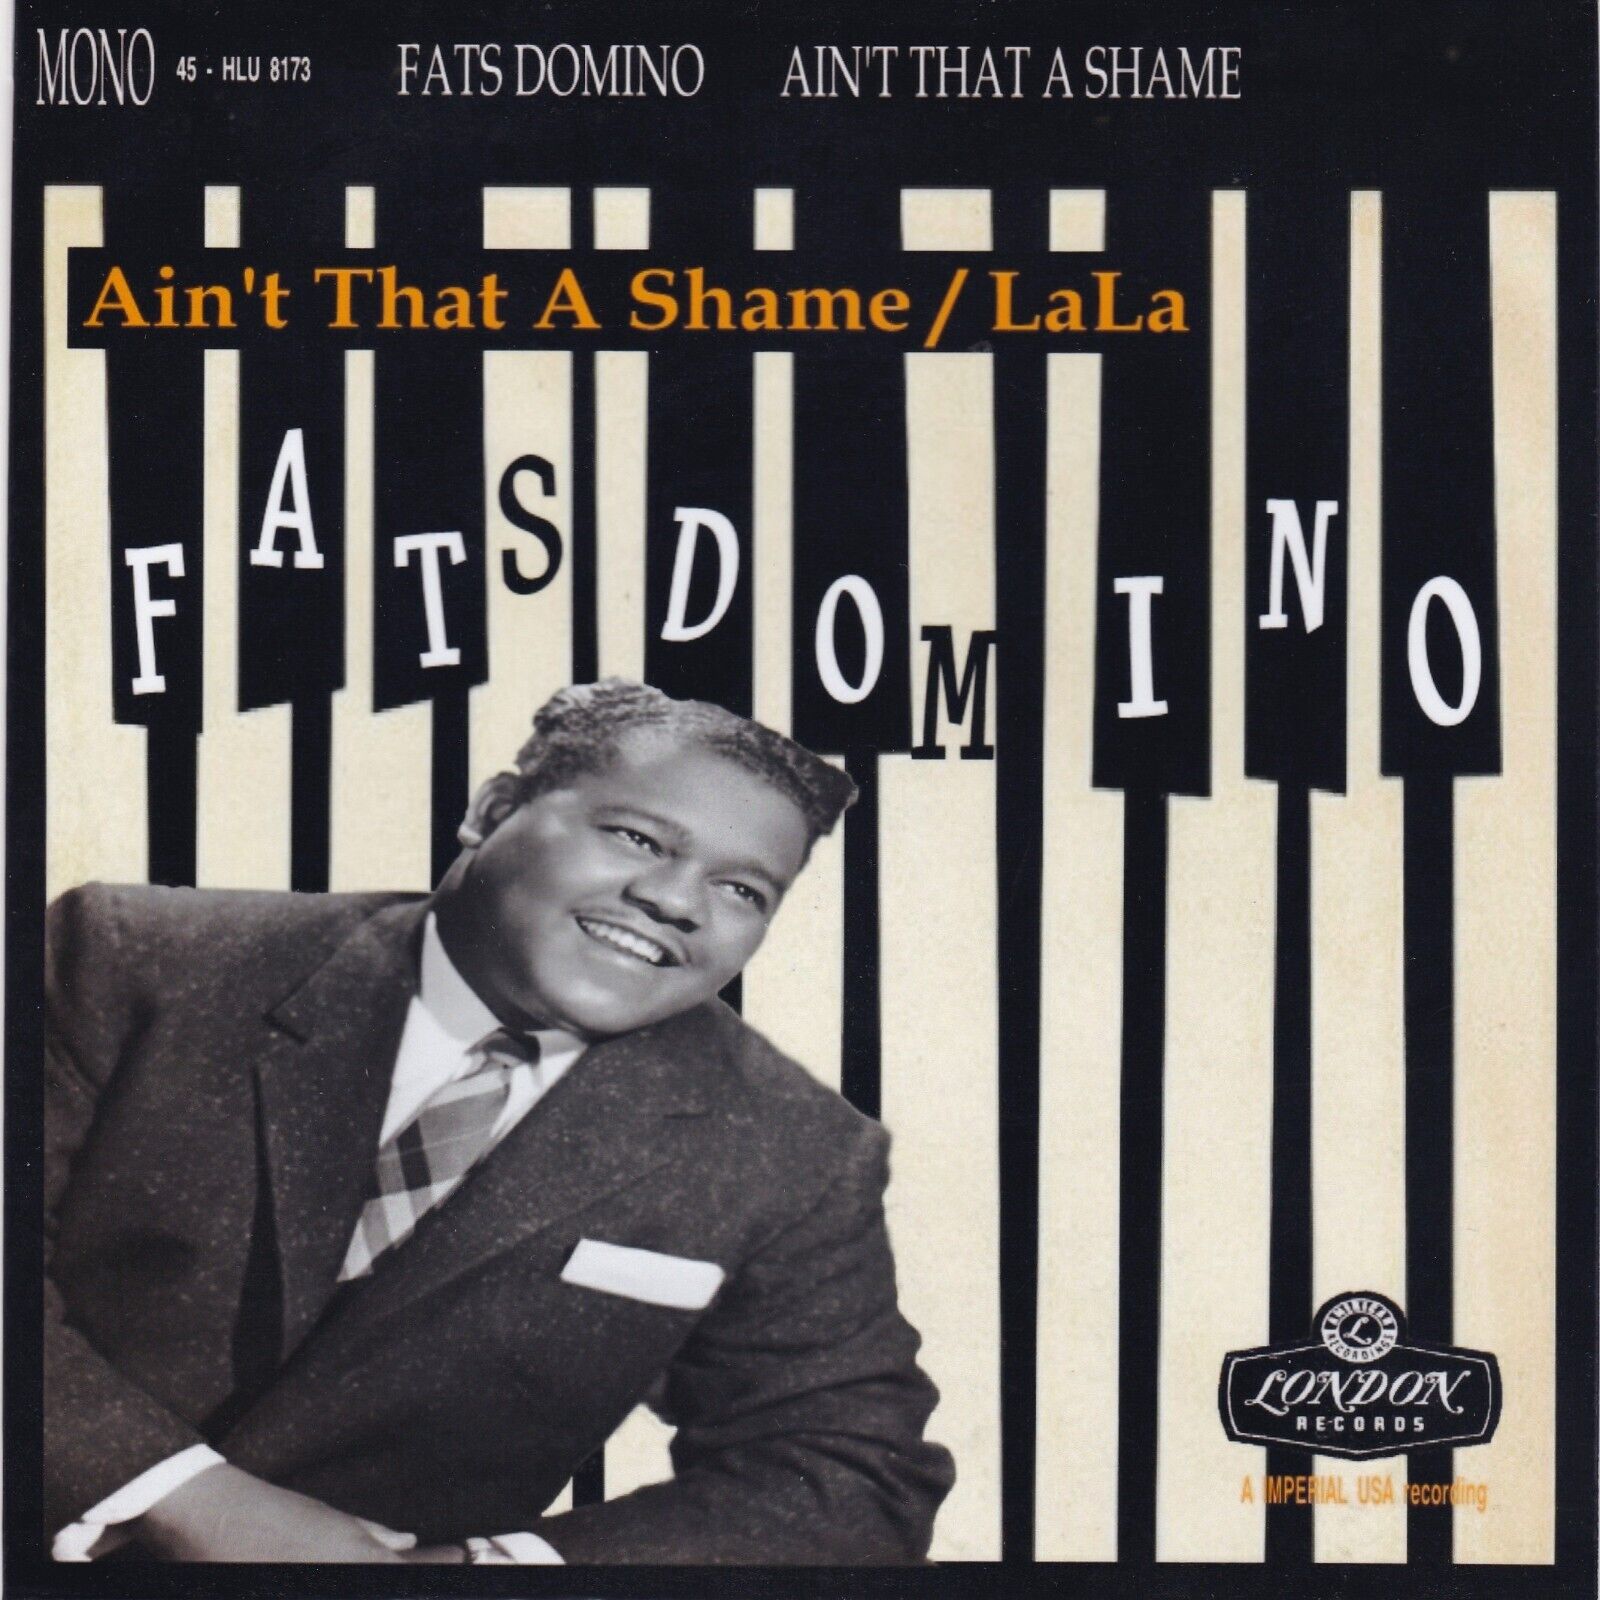 Fats Domino "Ain't It A Shame" Imperial 5348 Record & Two Custom Picture Sleeves | eBay